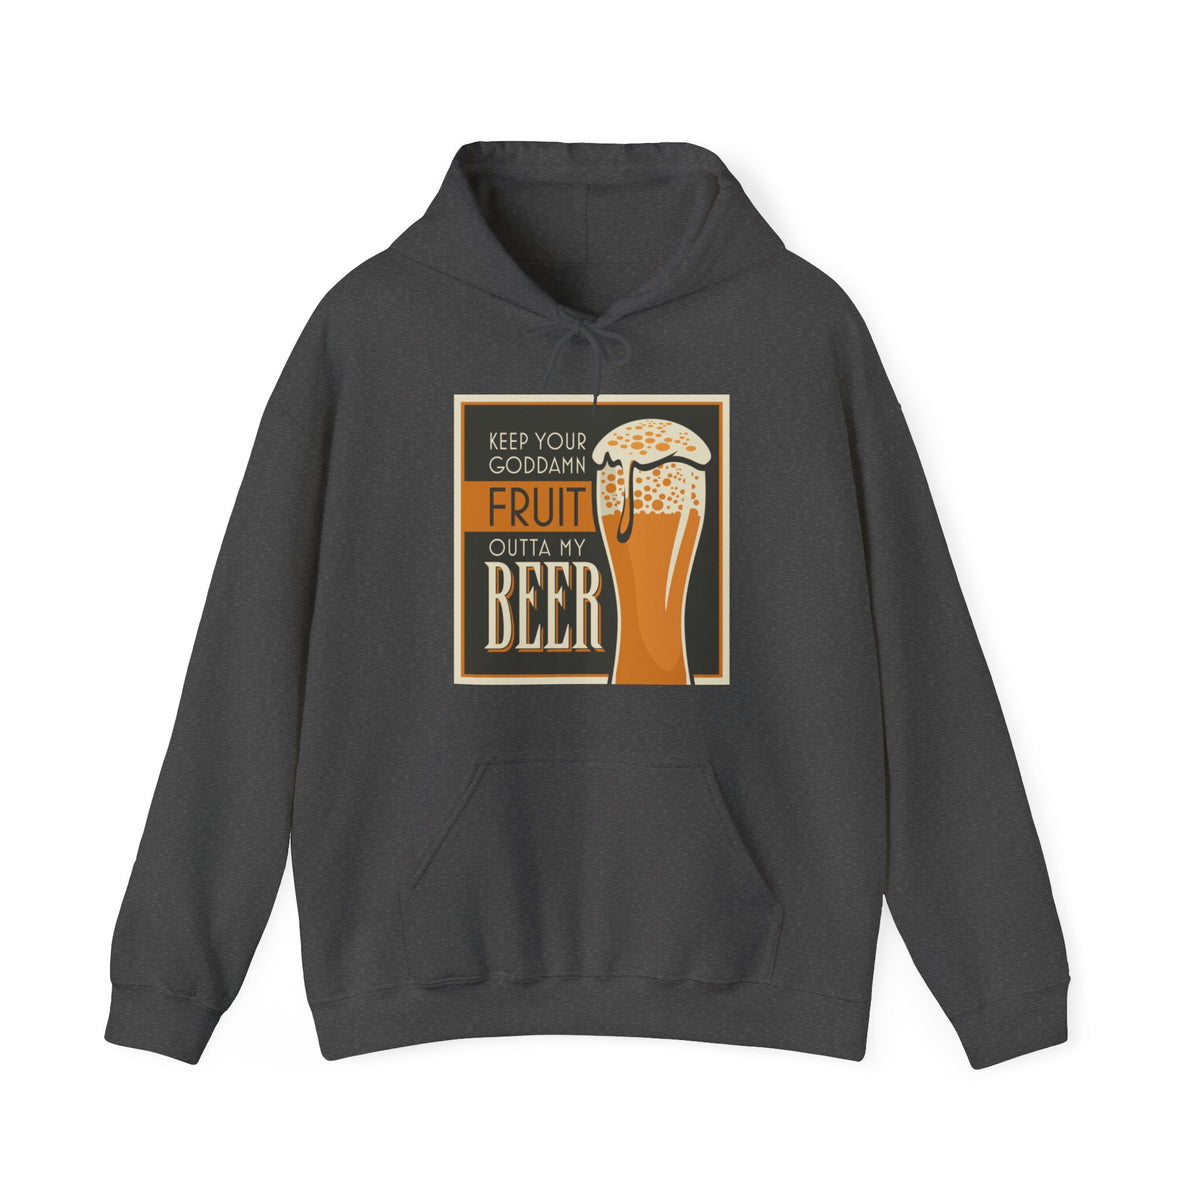 Keep Your Goddamn Fruit Outta My Beer - Hoodie